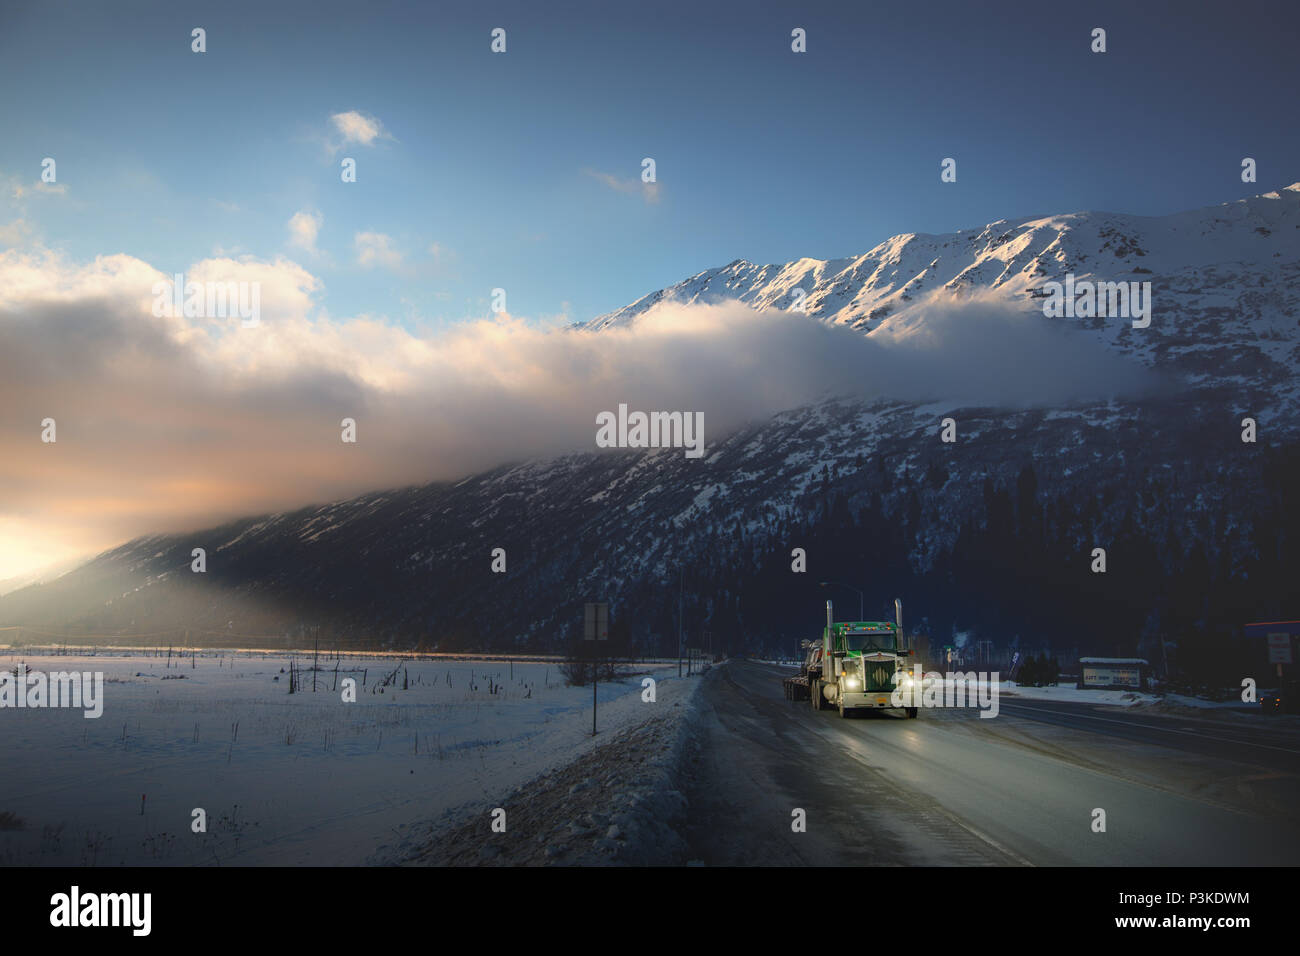 Truck driver driving in Alaska during sunset winter snowy conditions Stock Photo